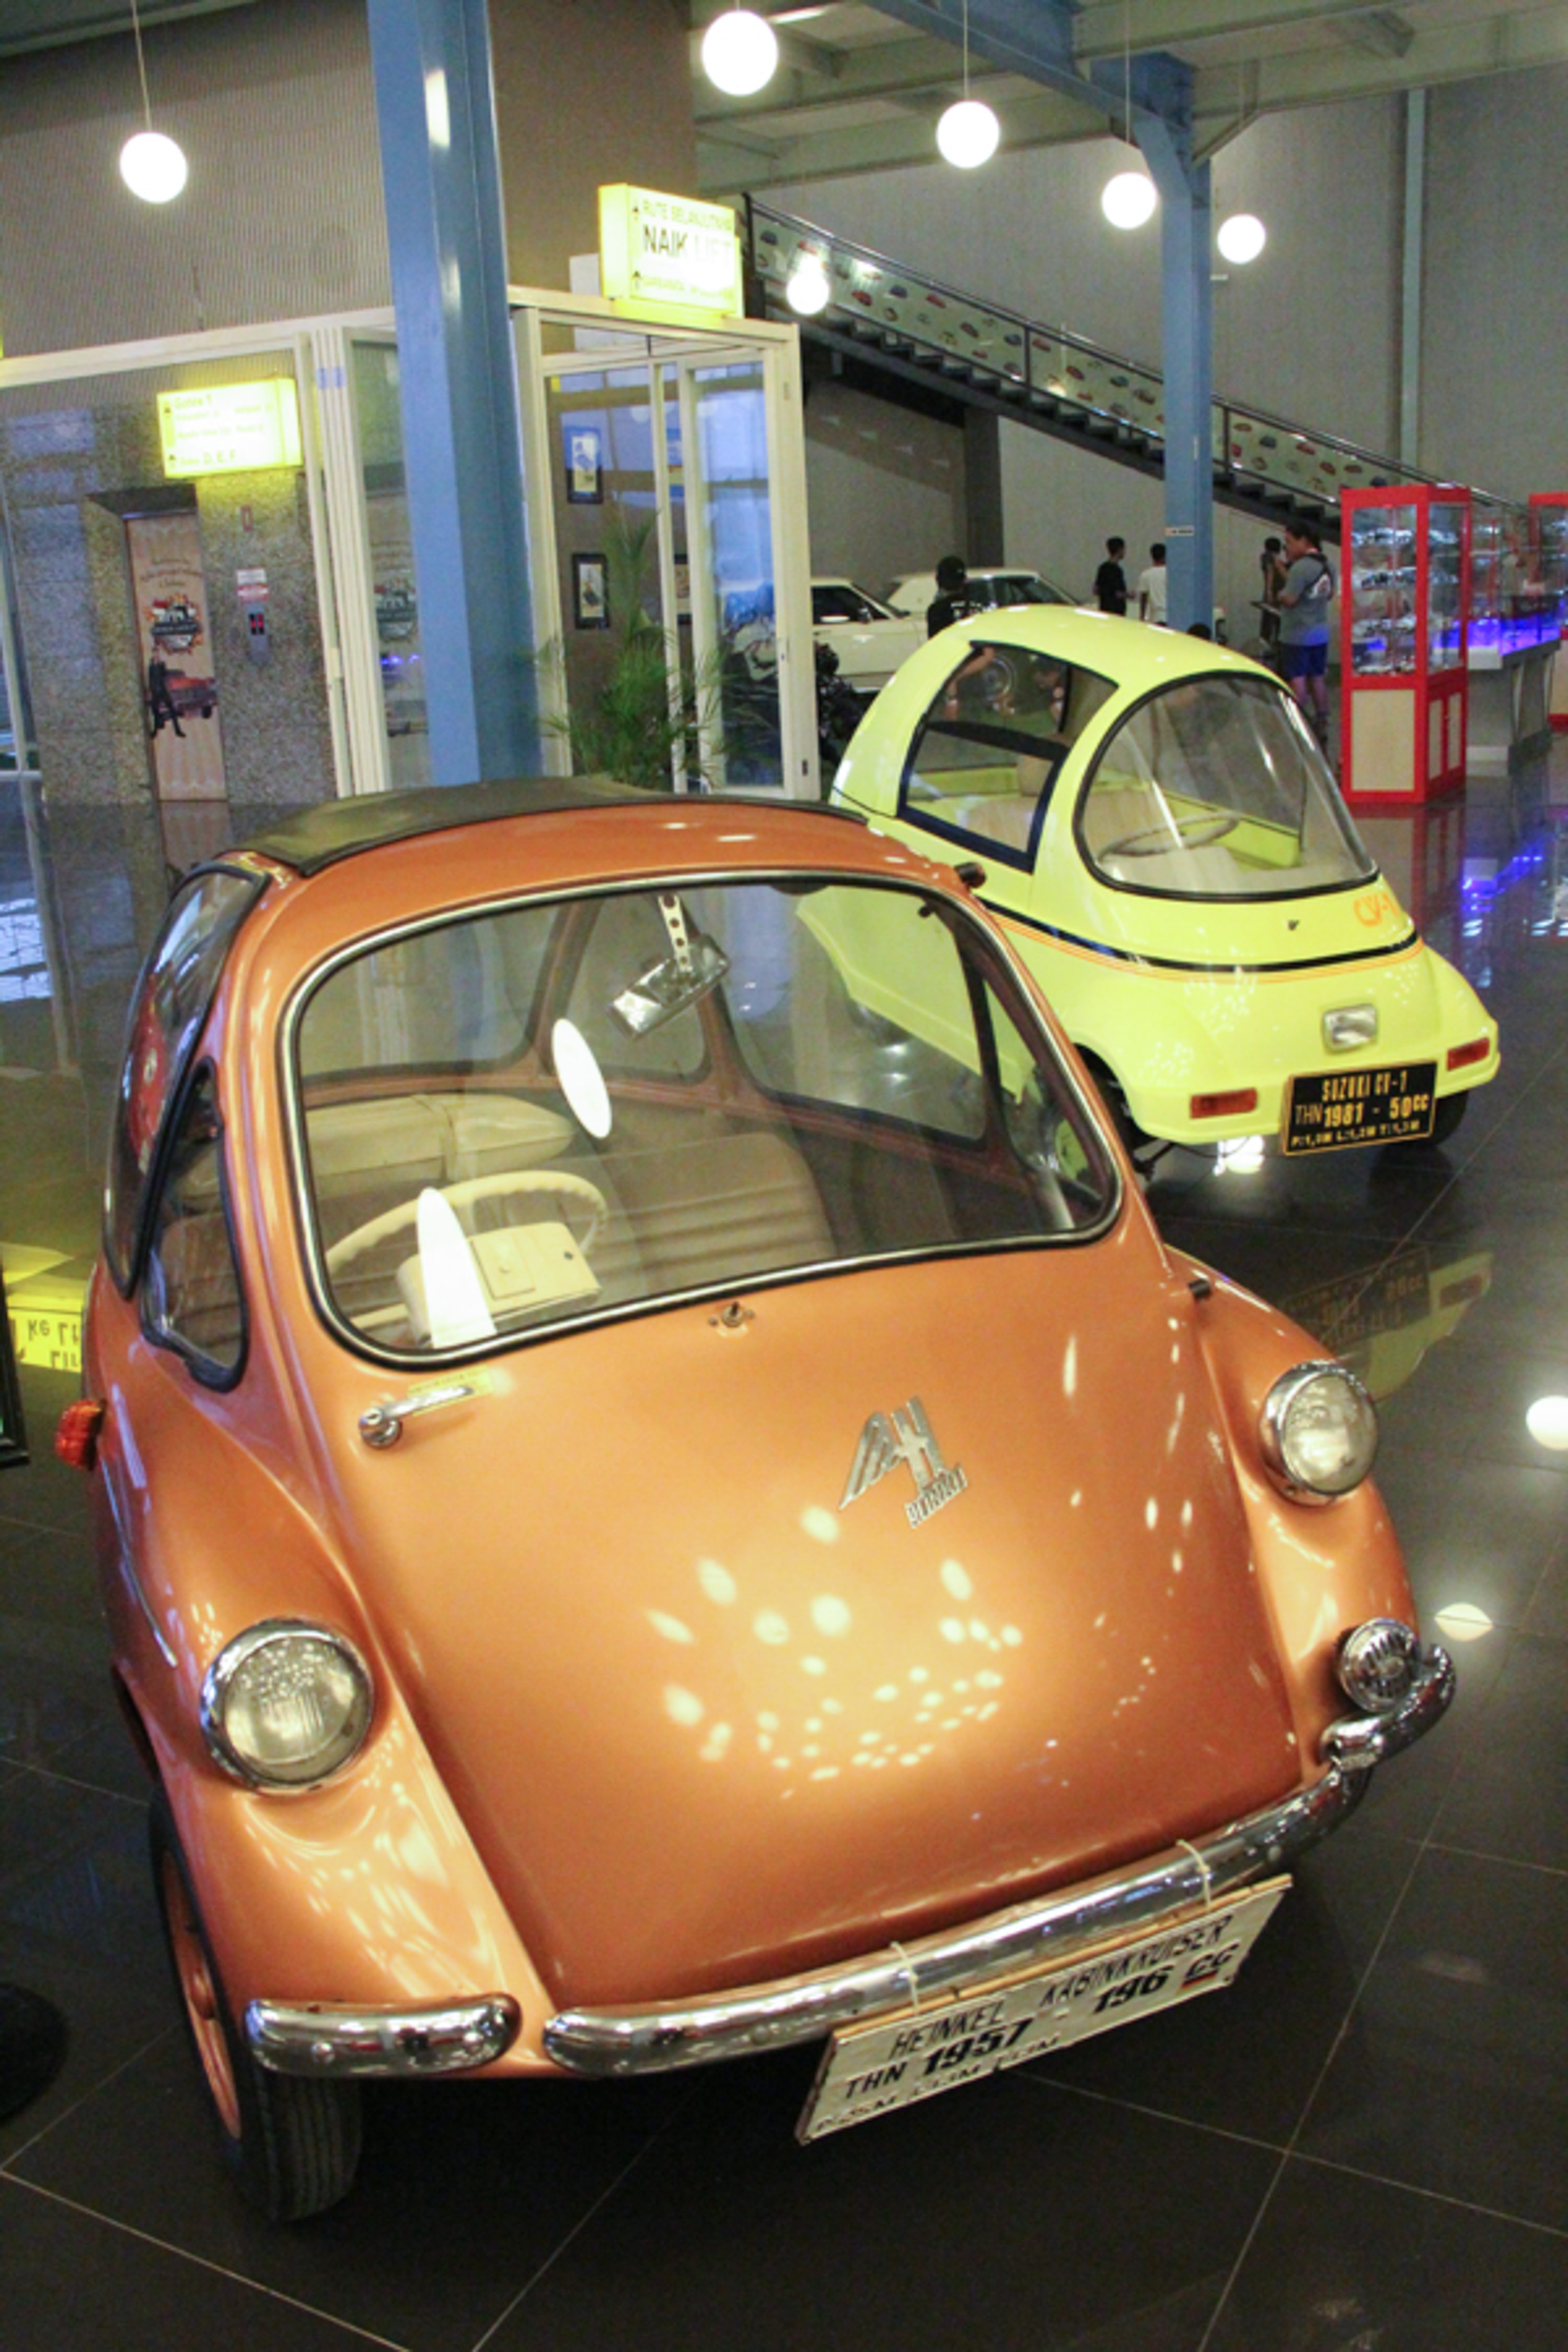 COMPACT. A 1957 Heinkel Kabine and a 1981 Suzuki CV-1 show unconventional solutions to compact urban transportation at Angkut trasnportation museum.  